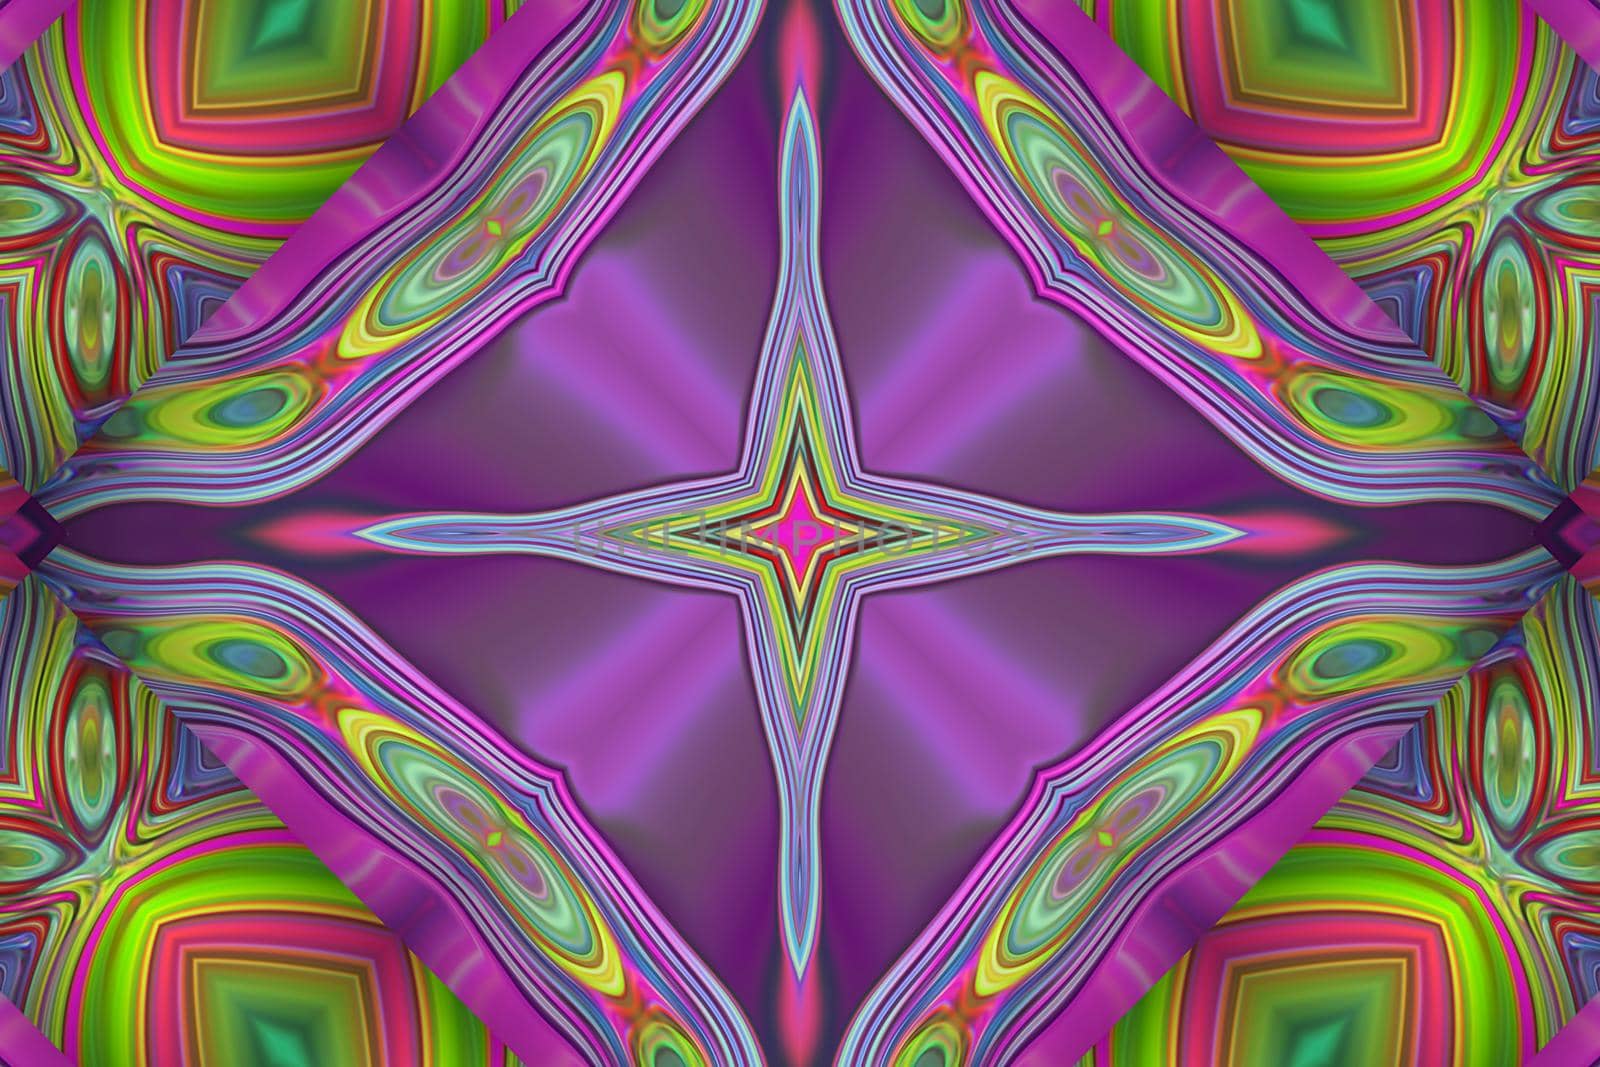 Abstract multicolored kaleidoscope background with a symmetrical pattern by Vvicca